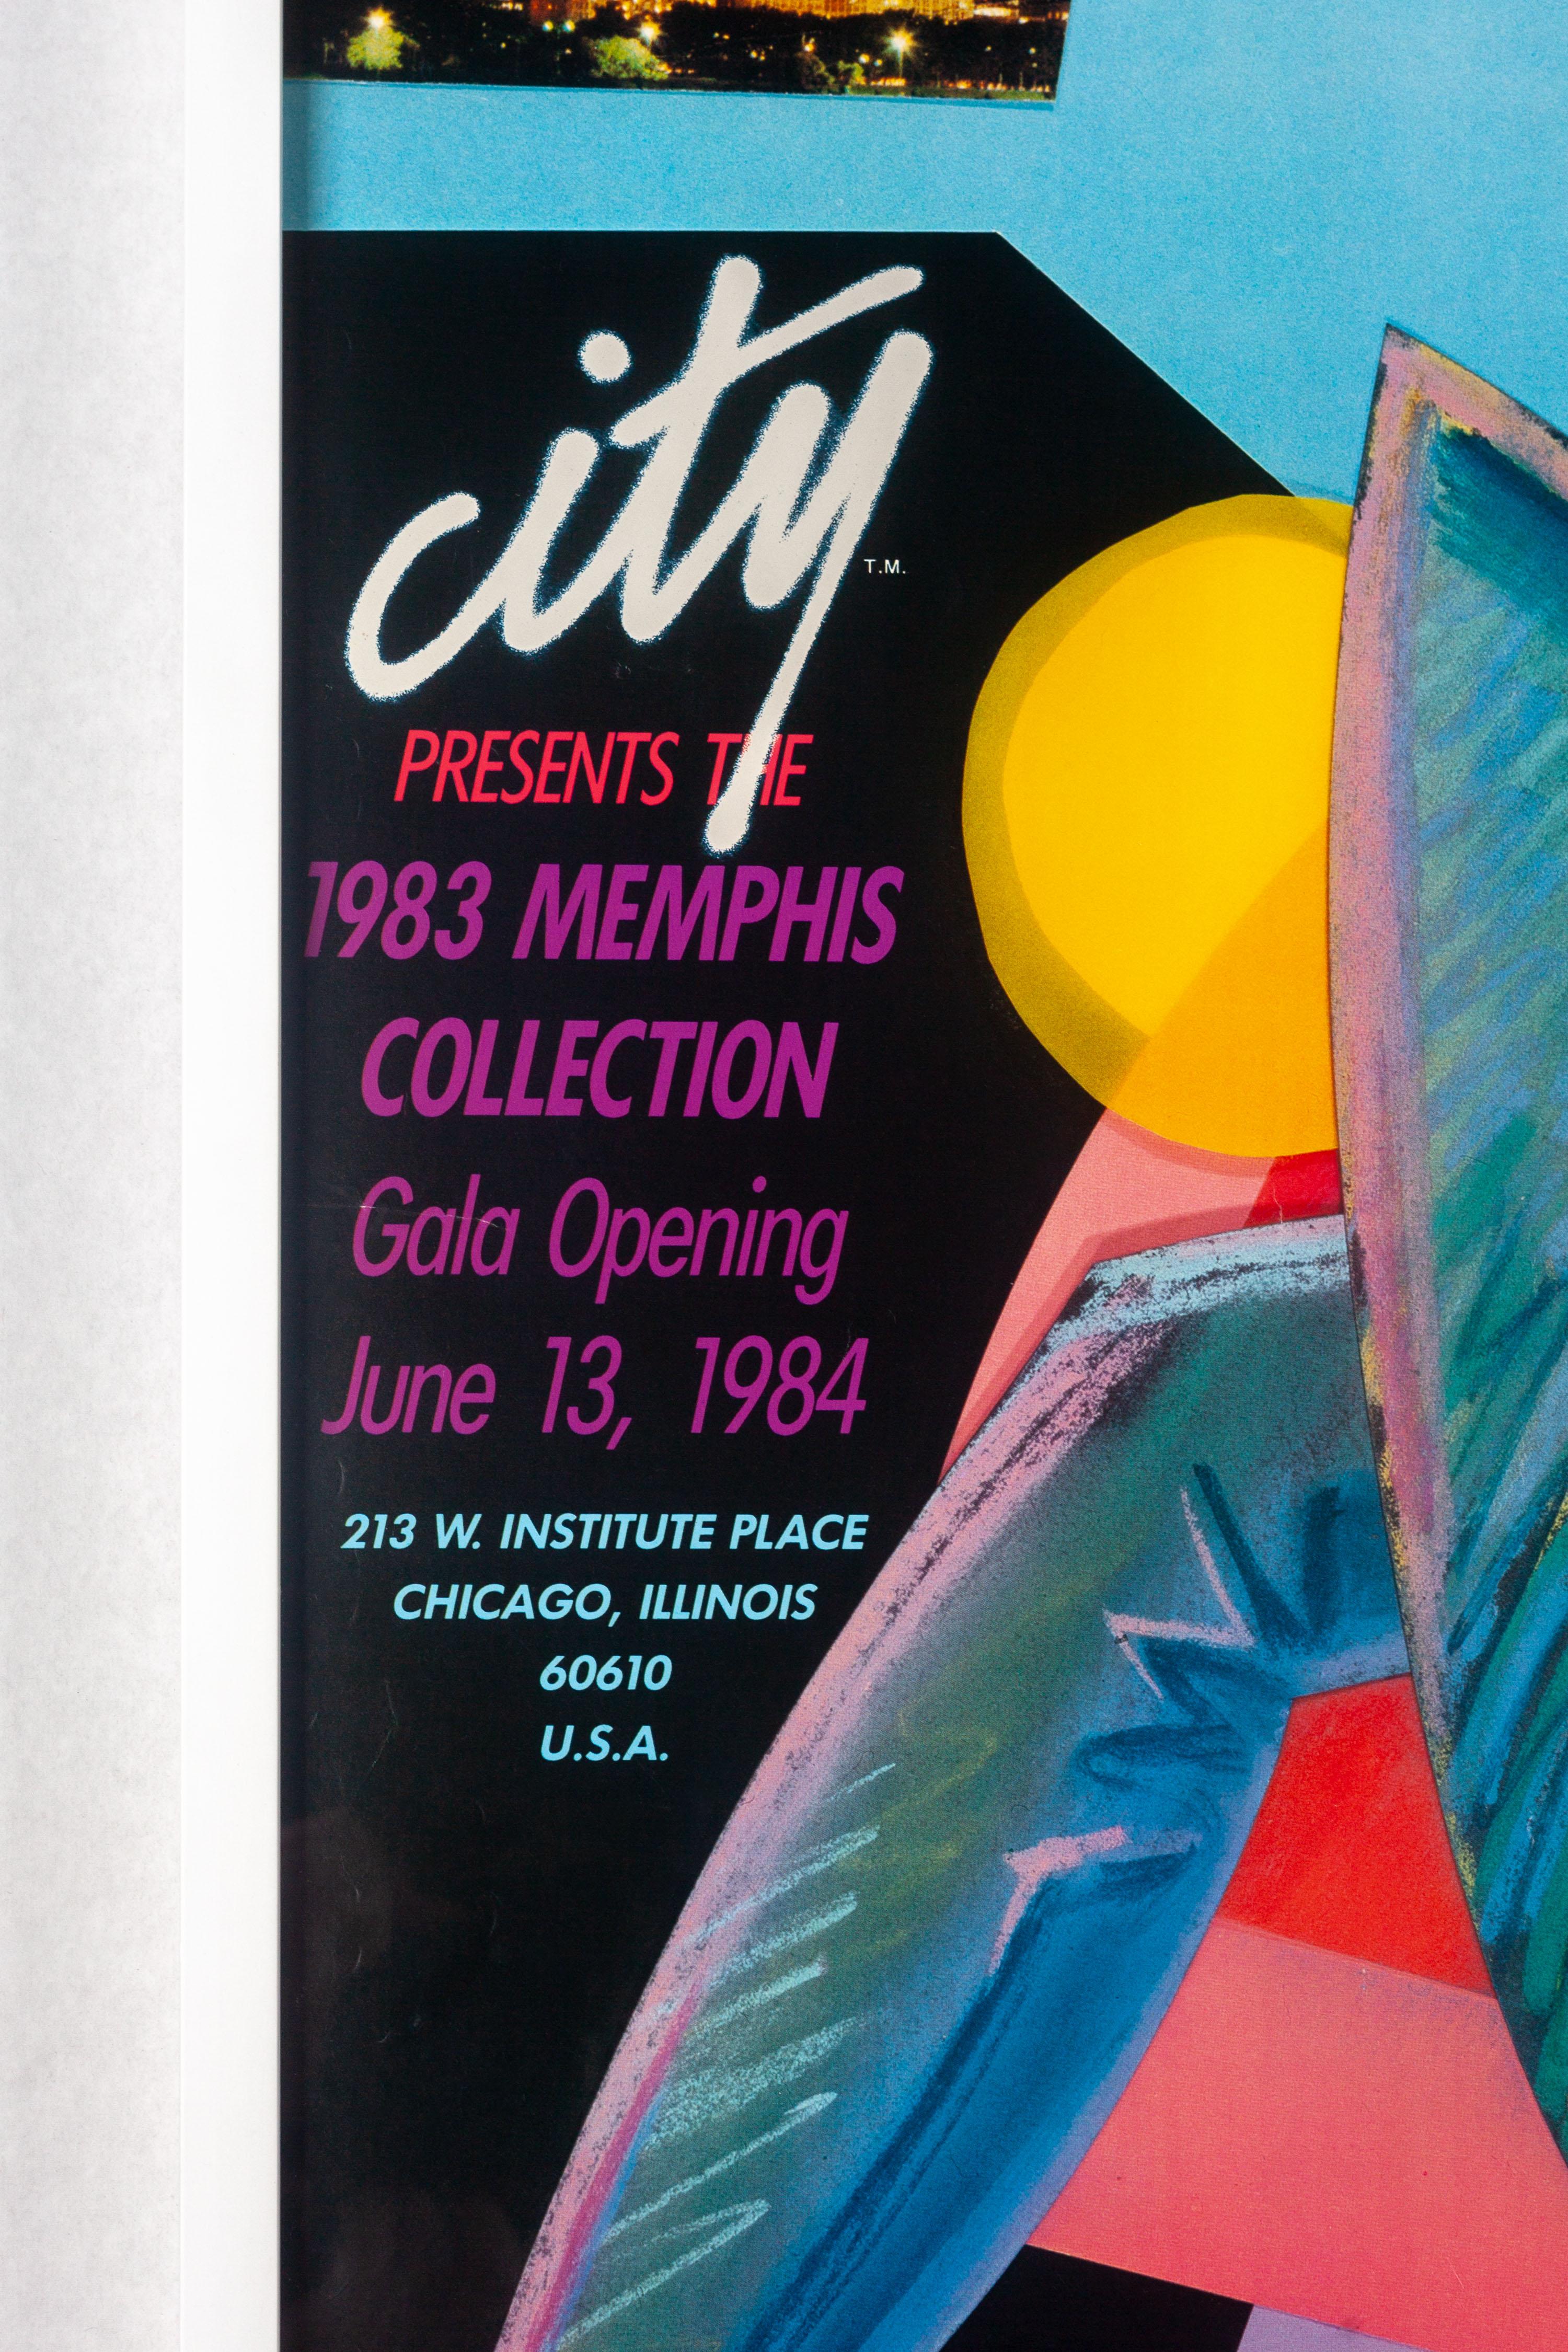 Iconic 1984 Memphis poster designed by Christopher Garland at Xeno design studio, with an illustration by Michael Glascott.

Designed for the 1984 Opening Gala event at the CITY store for the presentation of the first Memphis Collection in